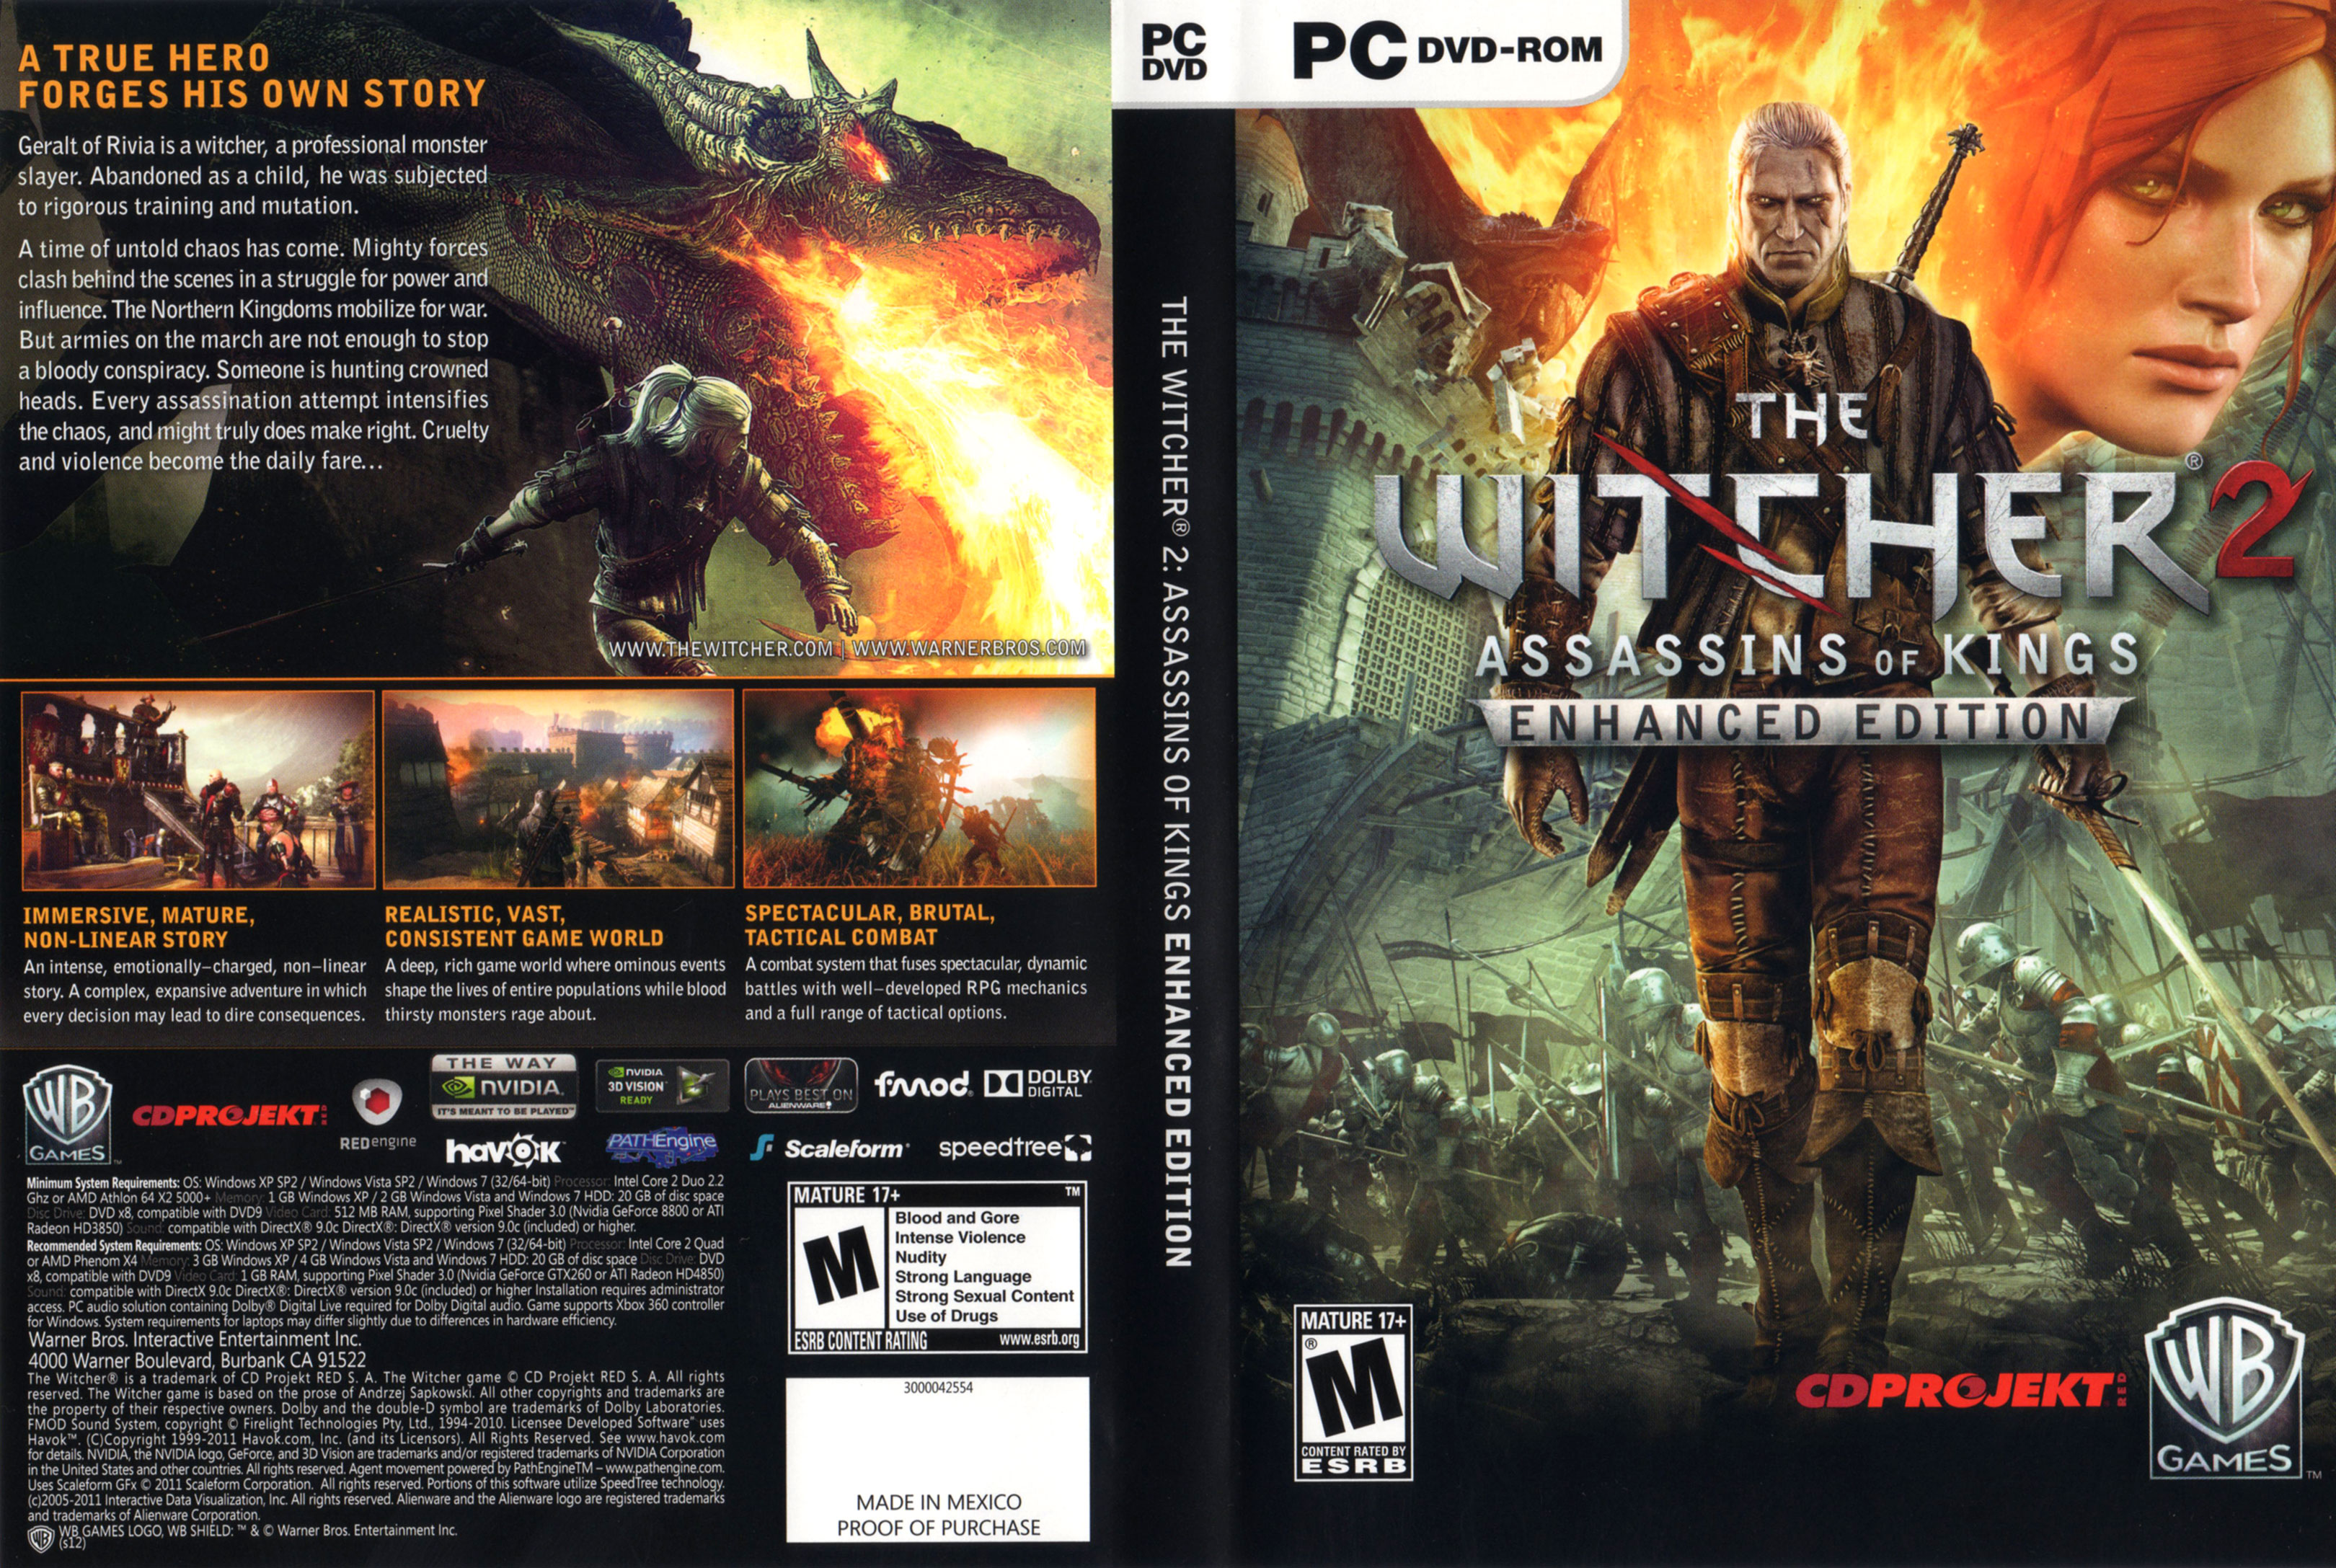 The Witcher 2: Assassins of Kings Enhanced Edition - DVD obal 2